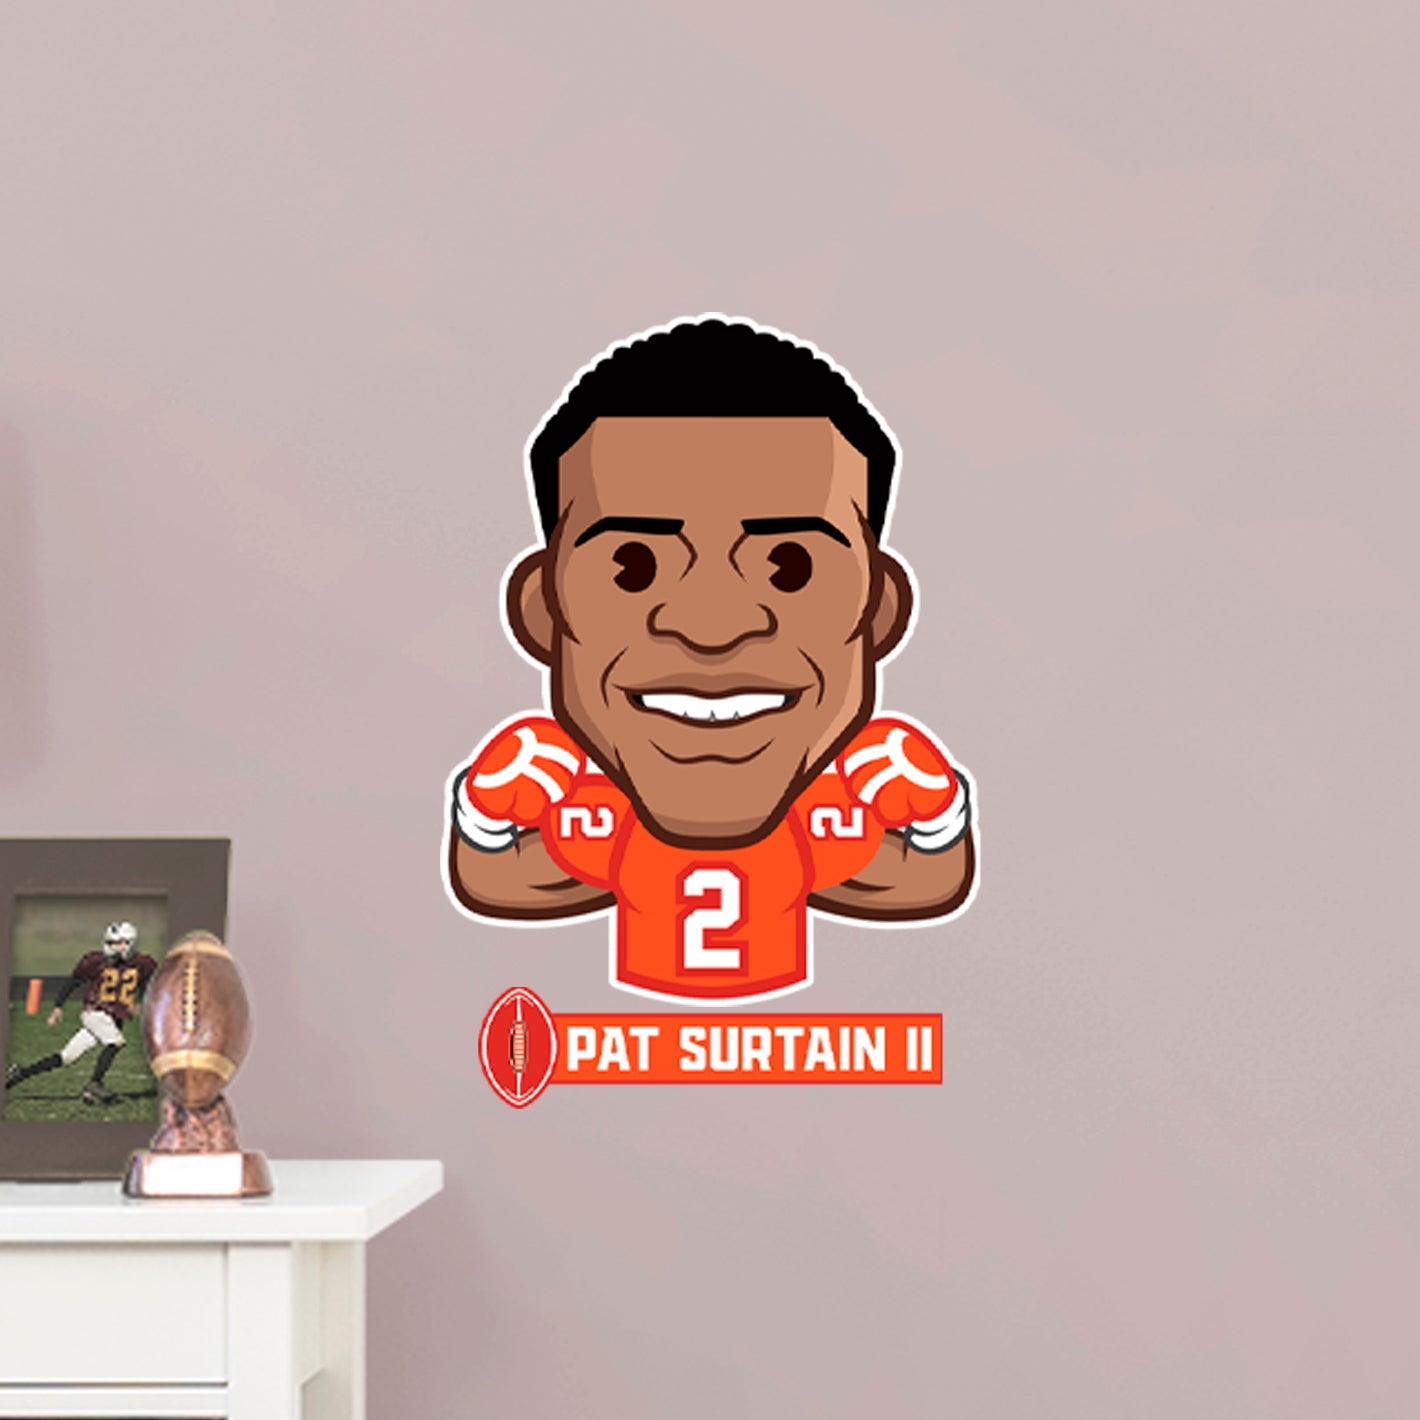 Denver Broncos: Pat Surtain II Emoji - Officially Licensed NFLPA Removable Adhesive Decal